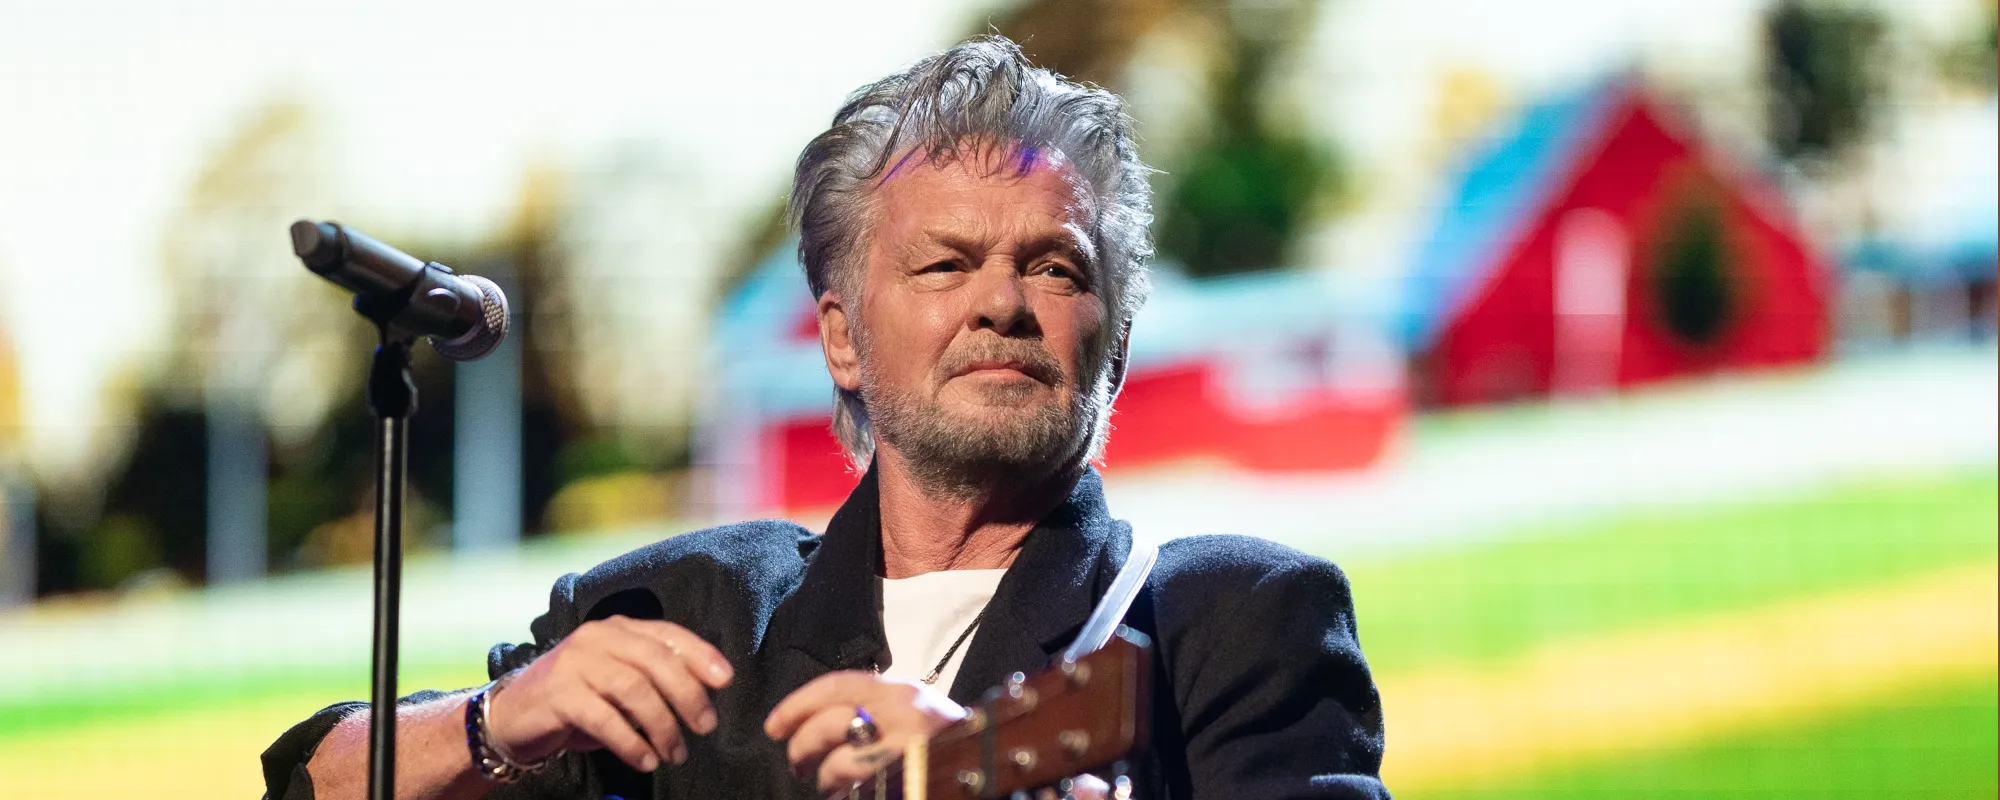 John Mellencamp Showcasing Artwork at the Rock and Roll Hall of Fame in New Permanent Exhibition